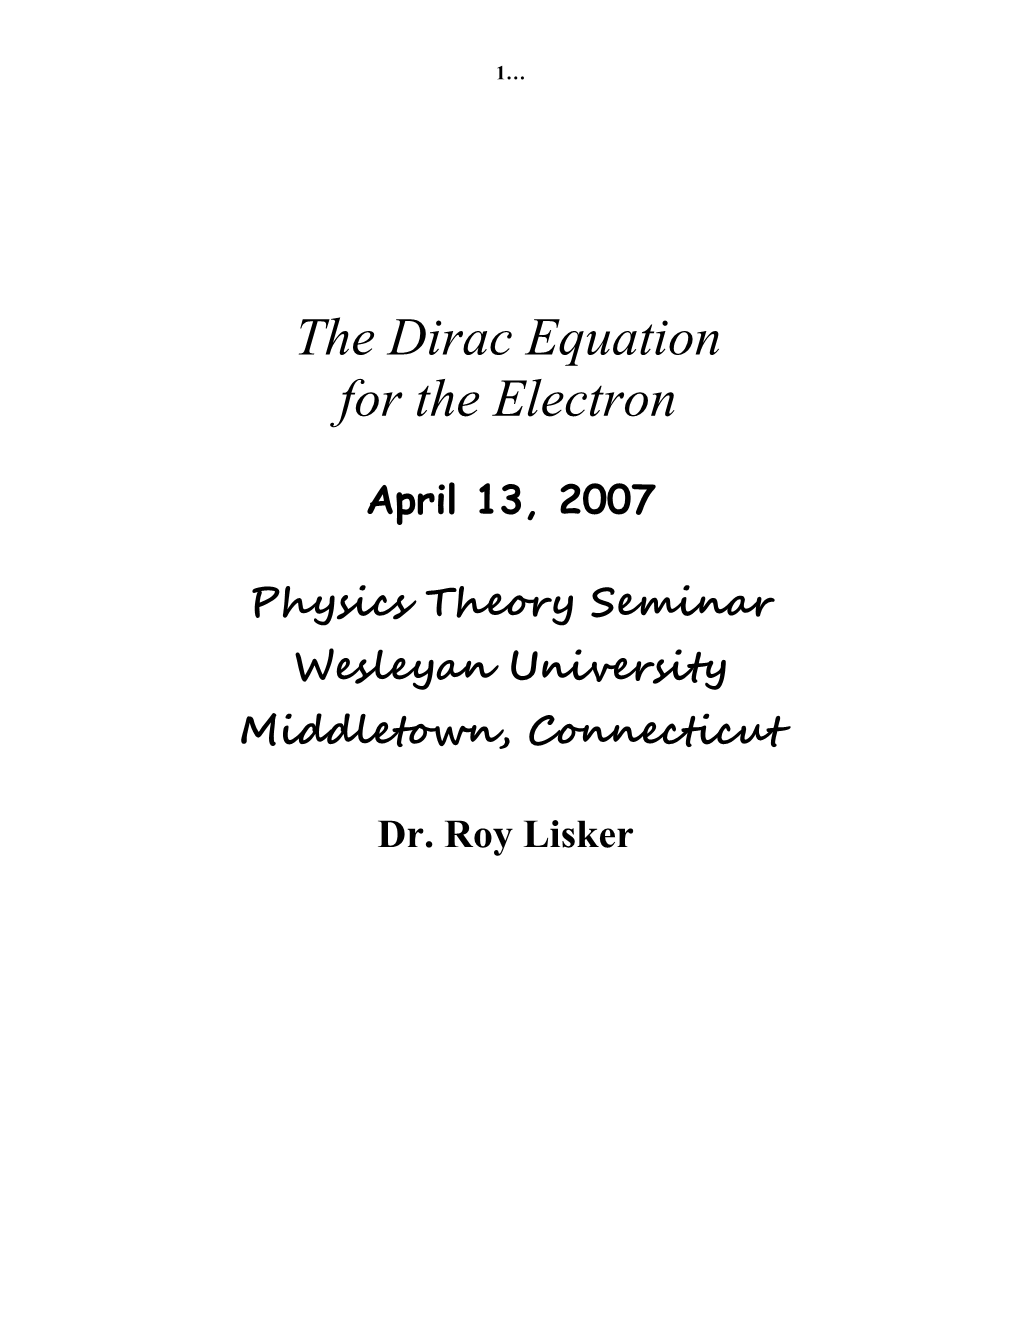 The Dirac Equation for the Electron